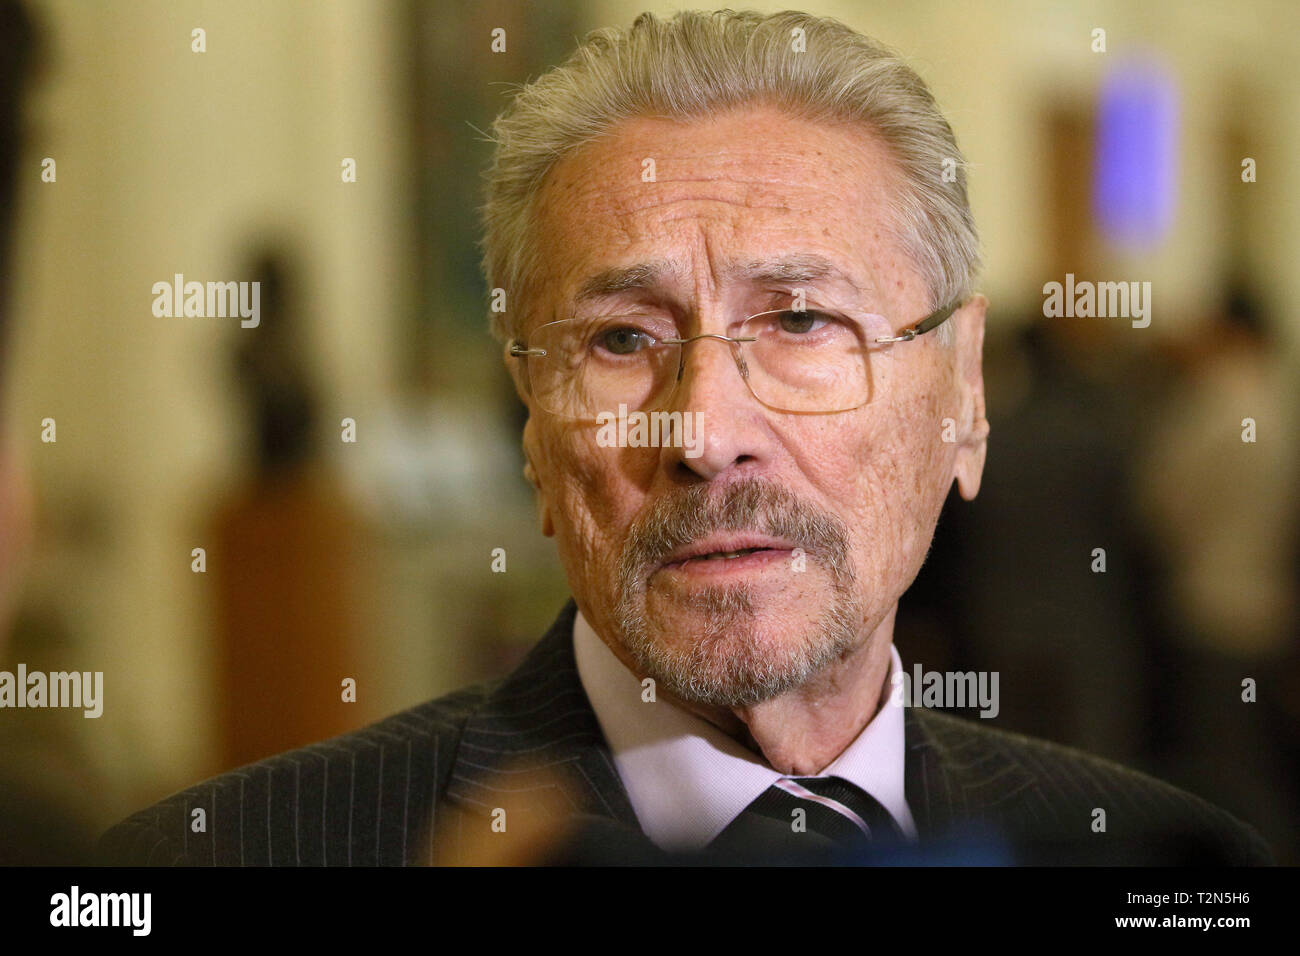 Bucharest, Romania - April 02, 2019: Emil Constantinescu, former President of Romania, speaks to the press on the occasion of the 15th anniversary of Romania's entry into NATO, in Bucharest. Credit: lcv/Alamy Live News Stock Photo